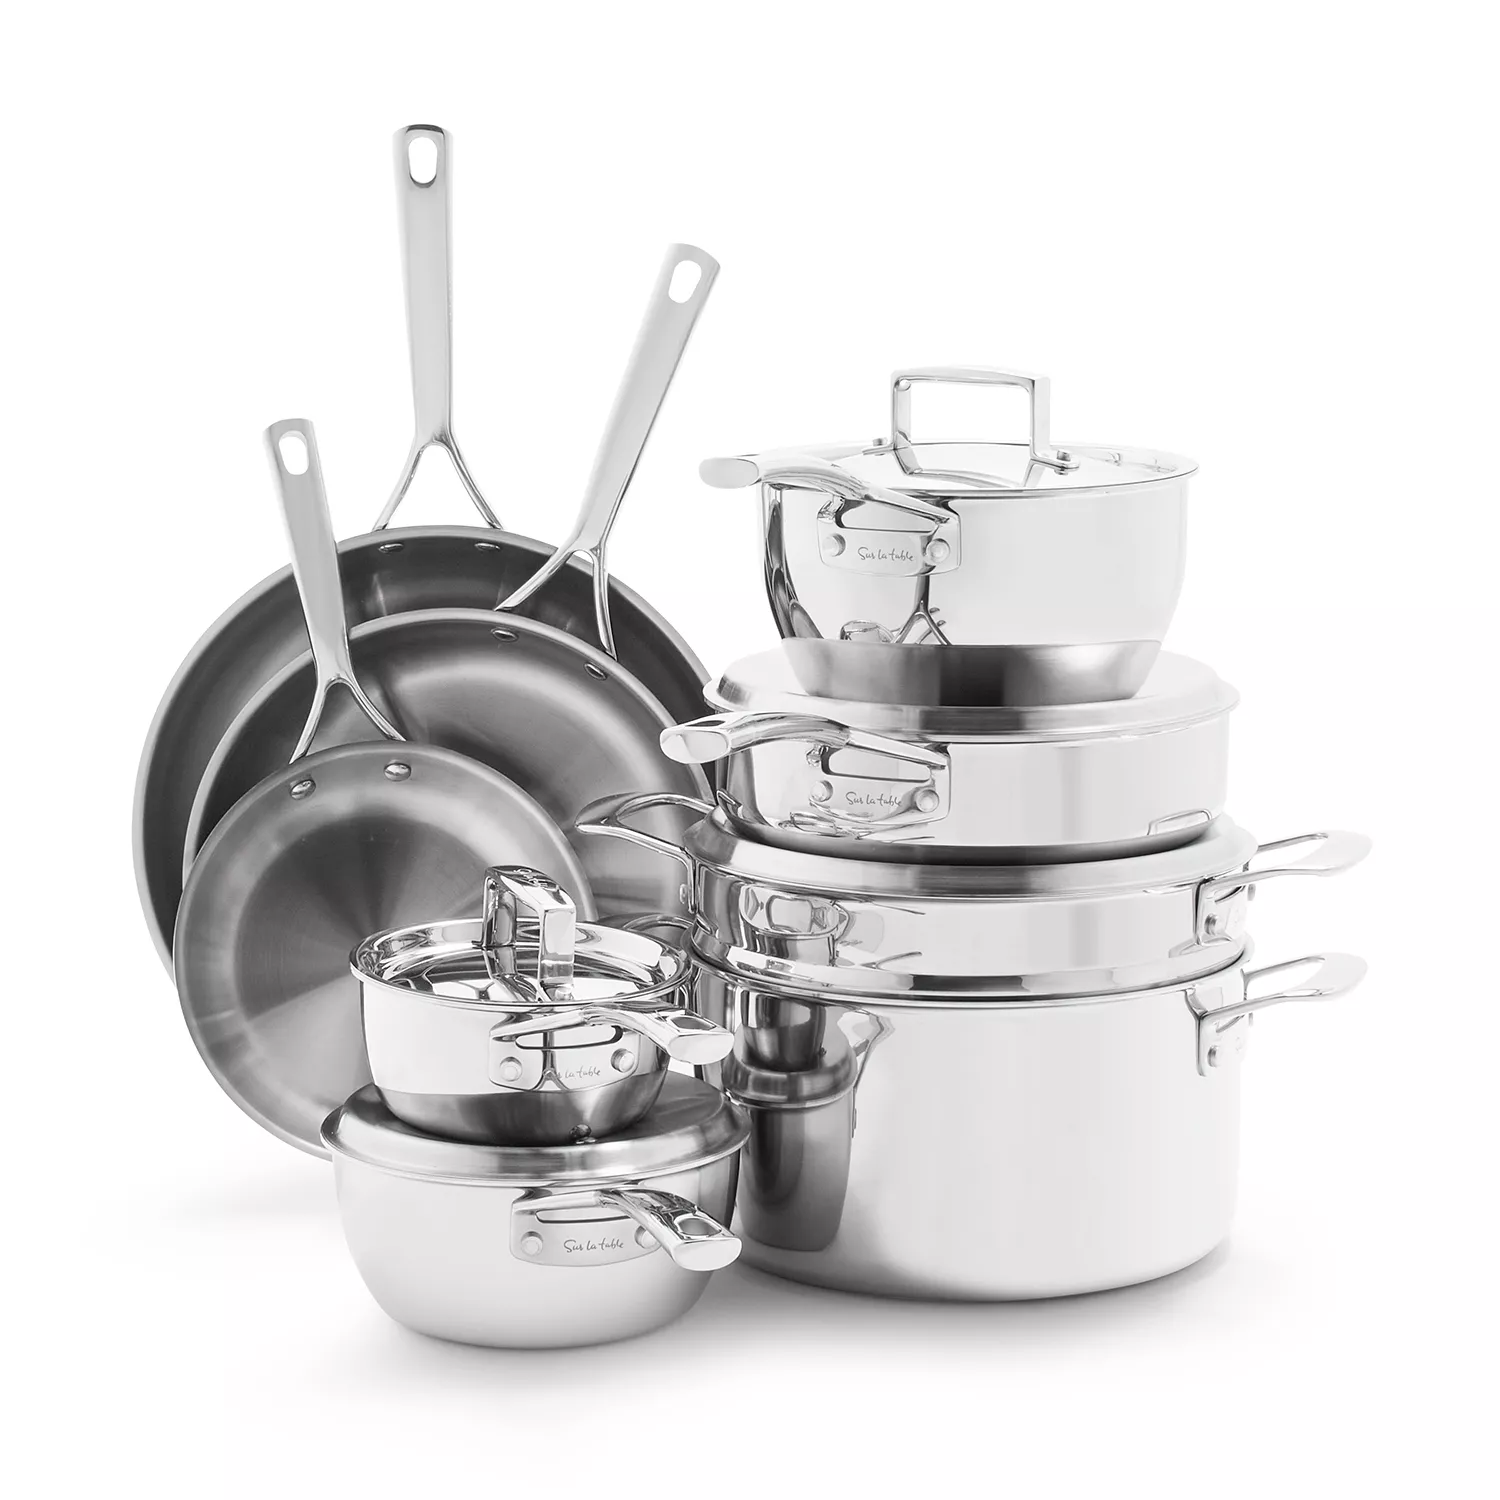 Sur La Table Classic 5-Ply Stainless Steel 14-Piece Cookware Set, Silver